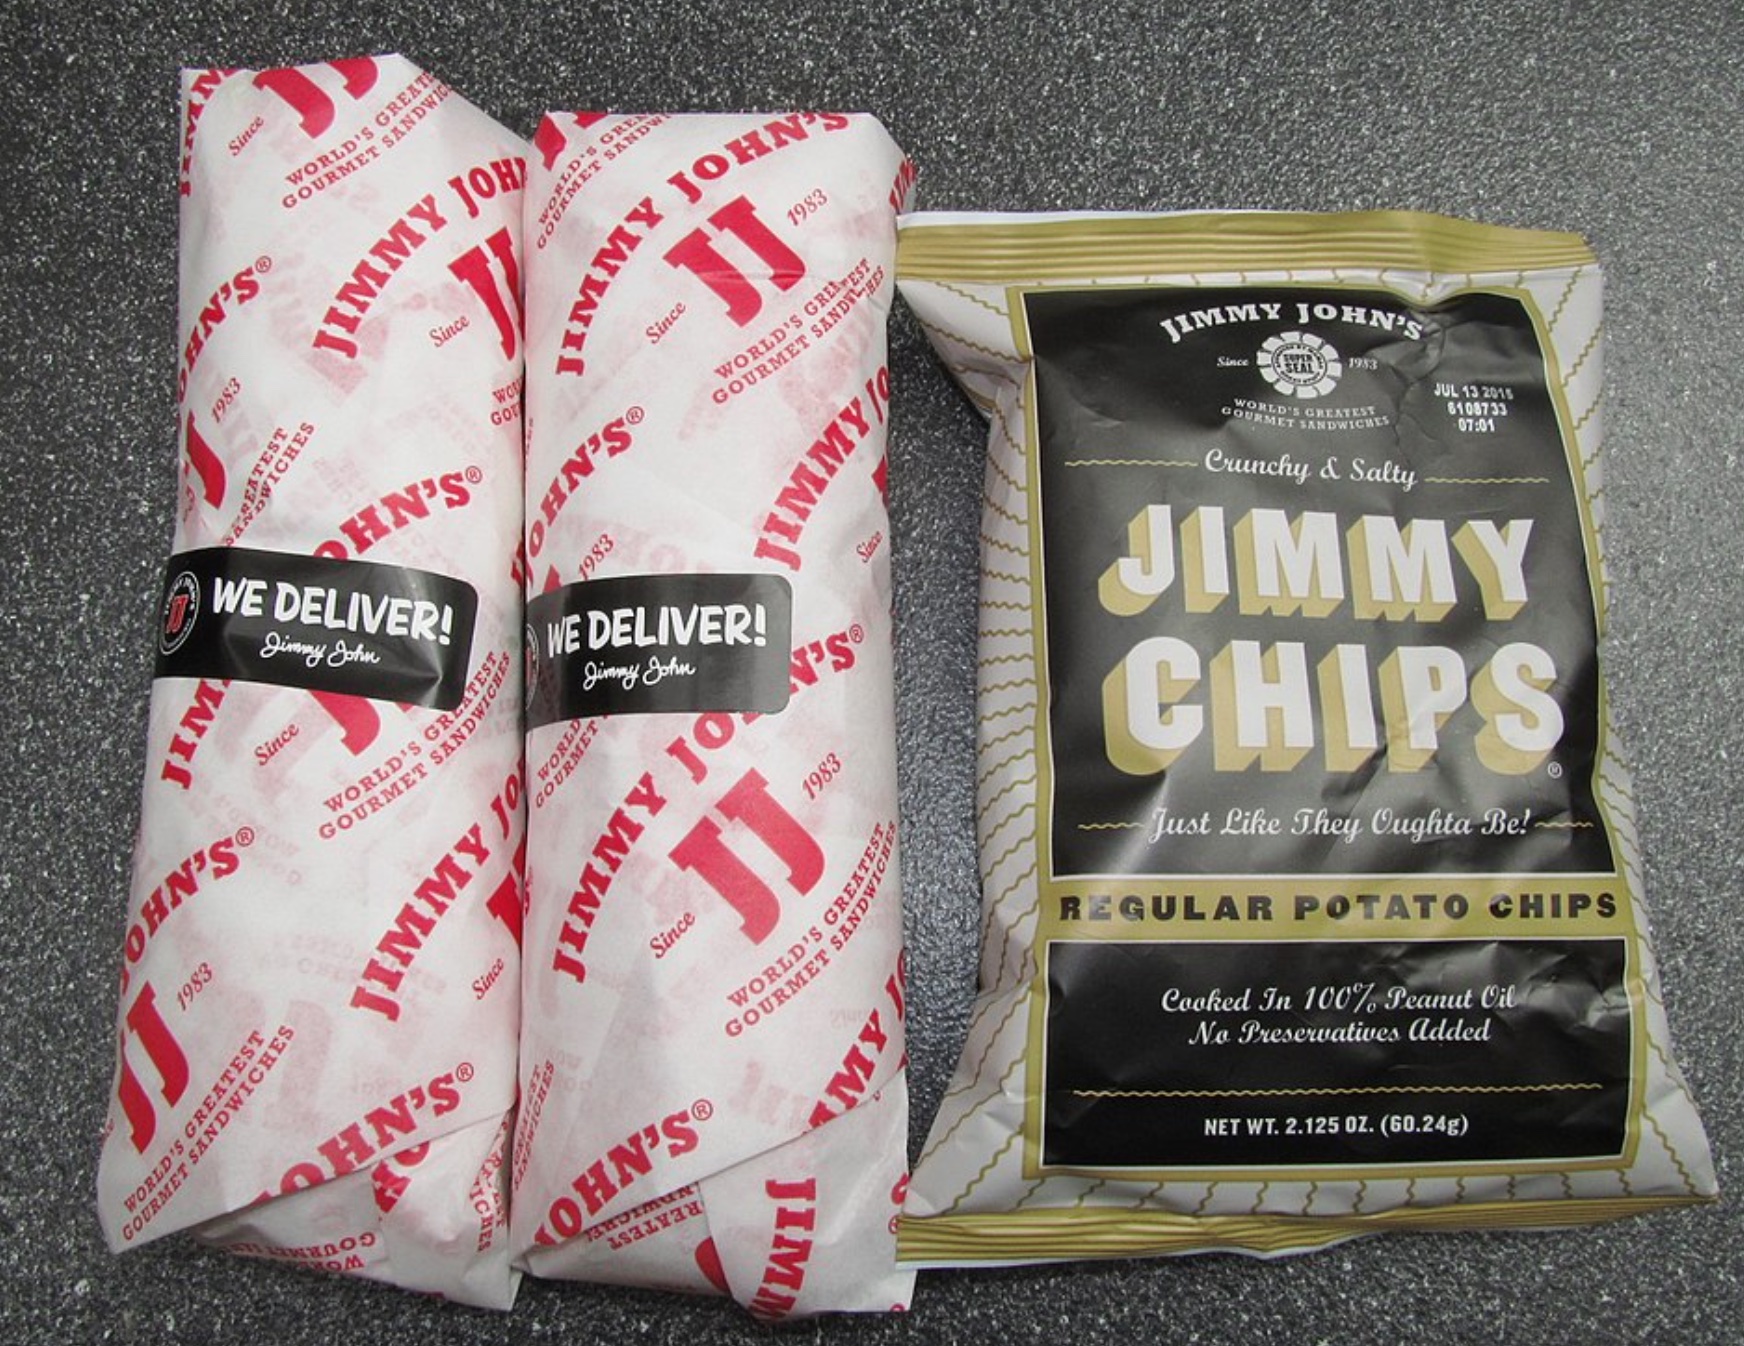 Jimmy John's sandwiches and chips; image by Willis Lam, CC BY-SA 2.0, via Wikimedia Commons.